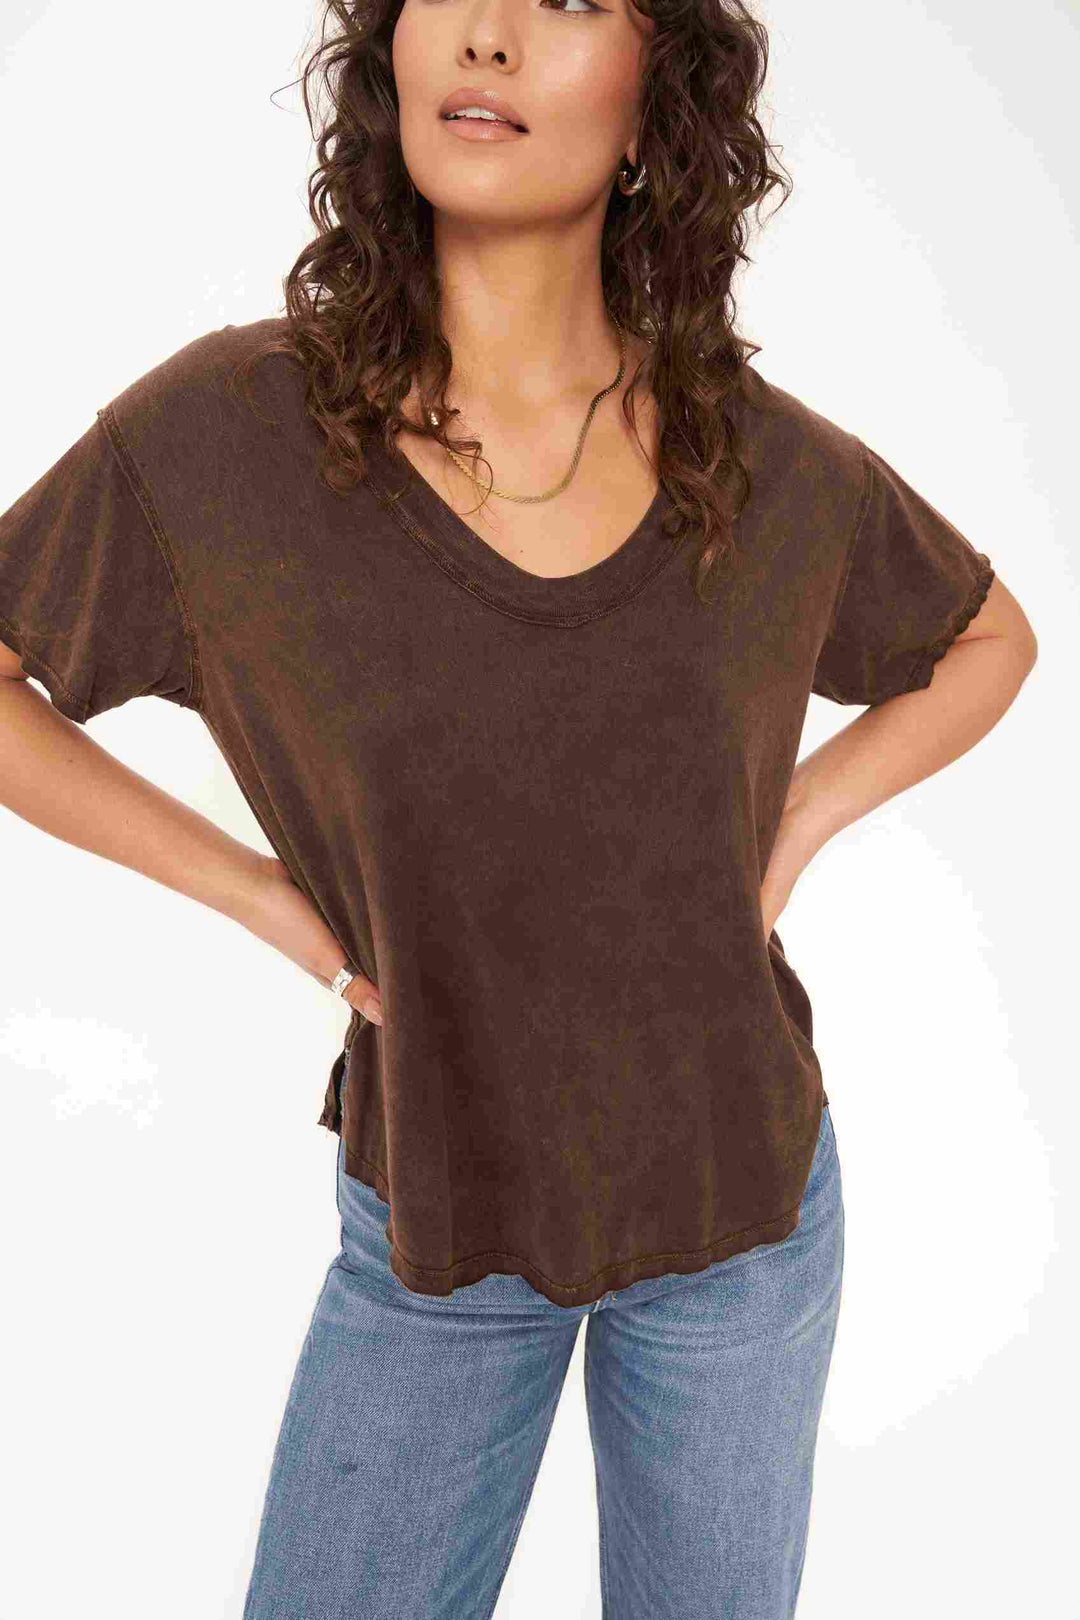 JADE SCOOP NECK WASHED TEE - MW RICH OAK - Kingfisher Road - Online Boutique